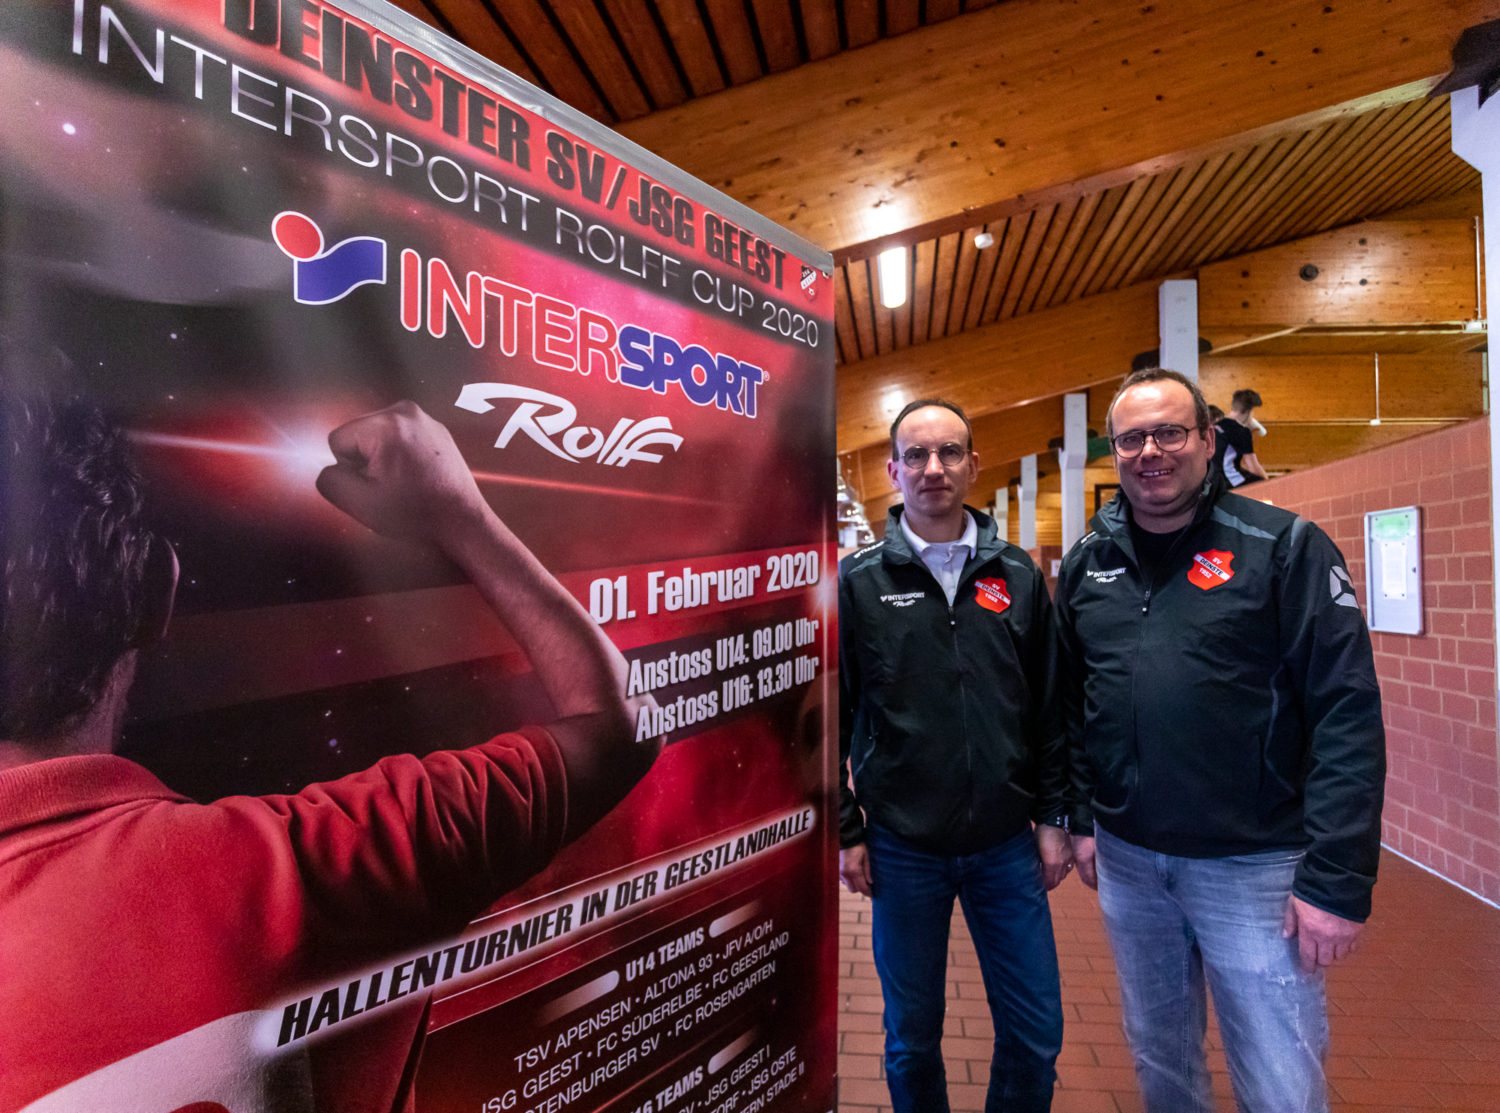 You are currently viewing Intersport Rolff Cup 2020 – Wir sagen DANKE!